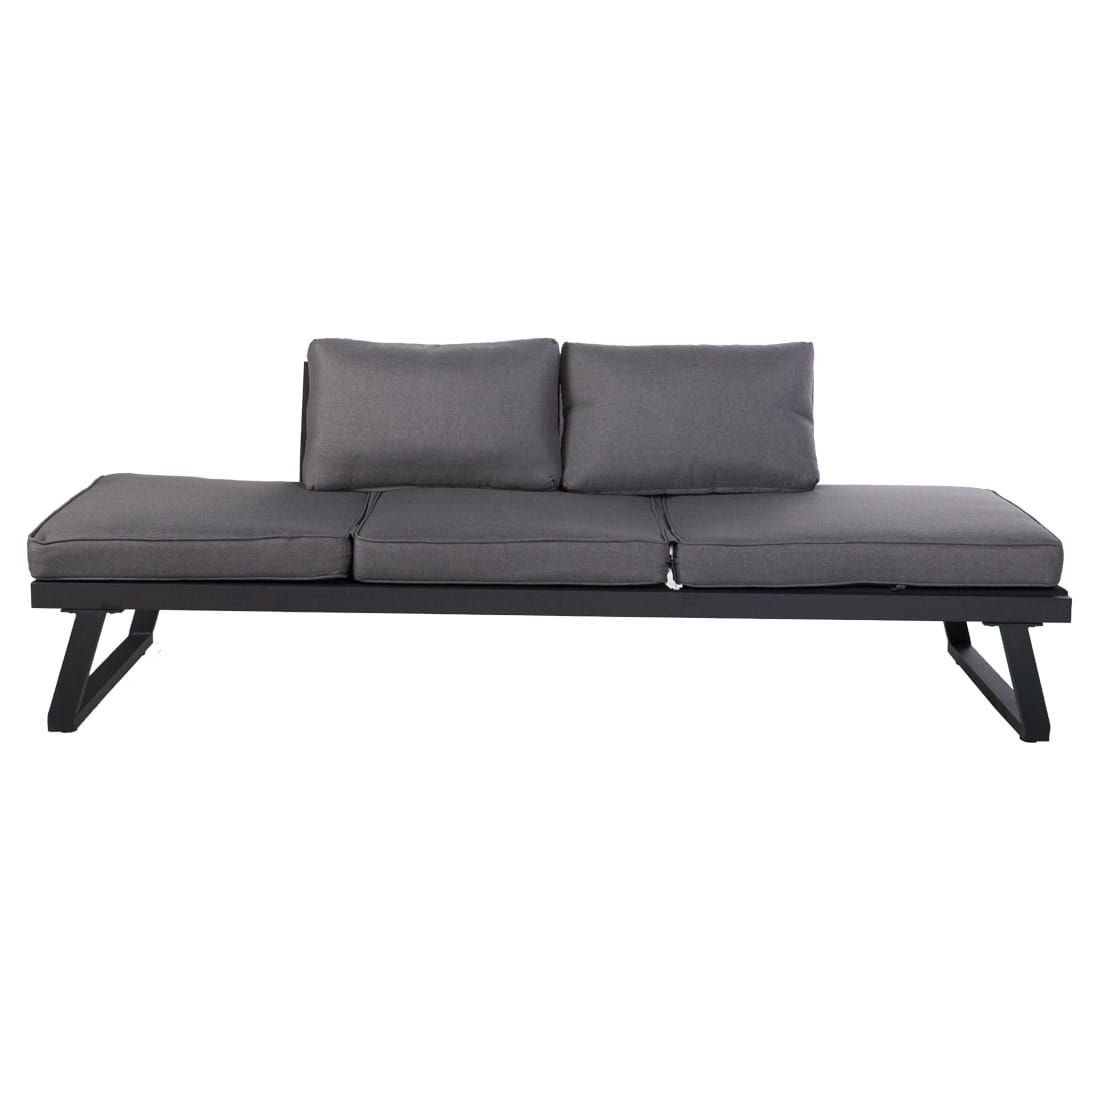 OUTLIV. Loungeliege Aluminium/Polyester